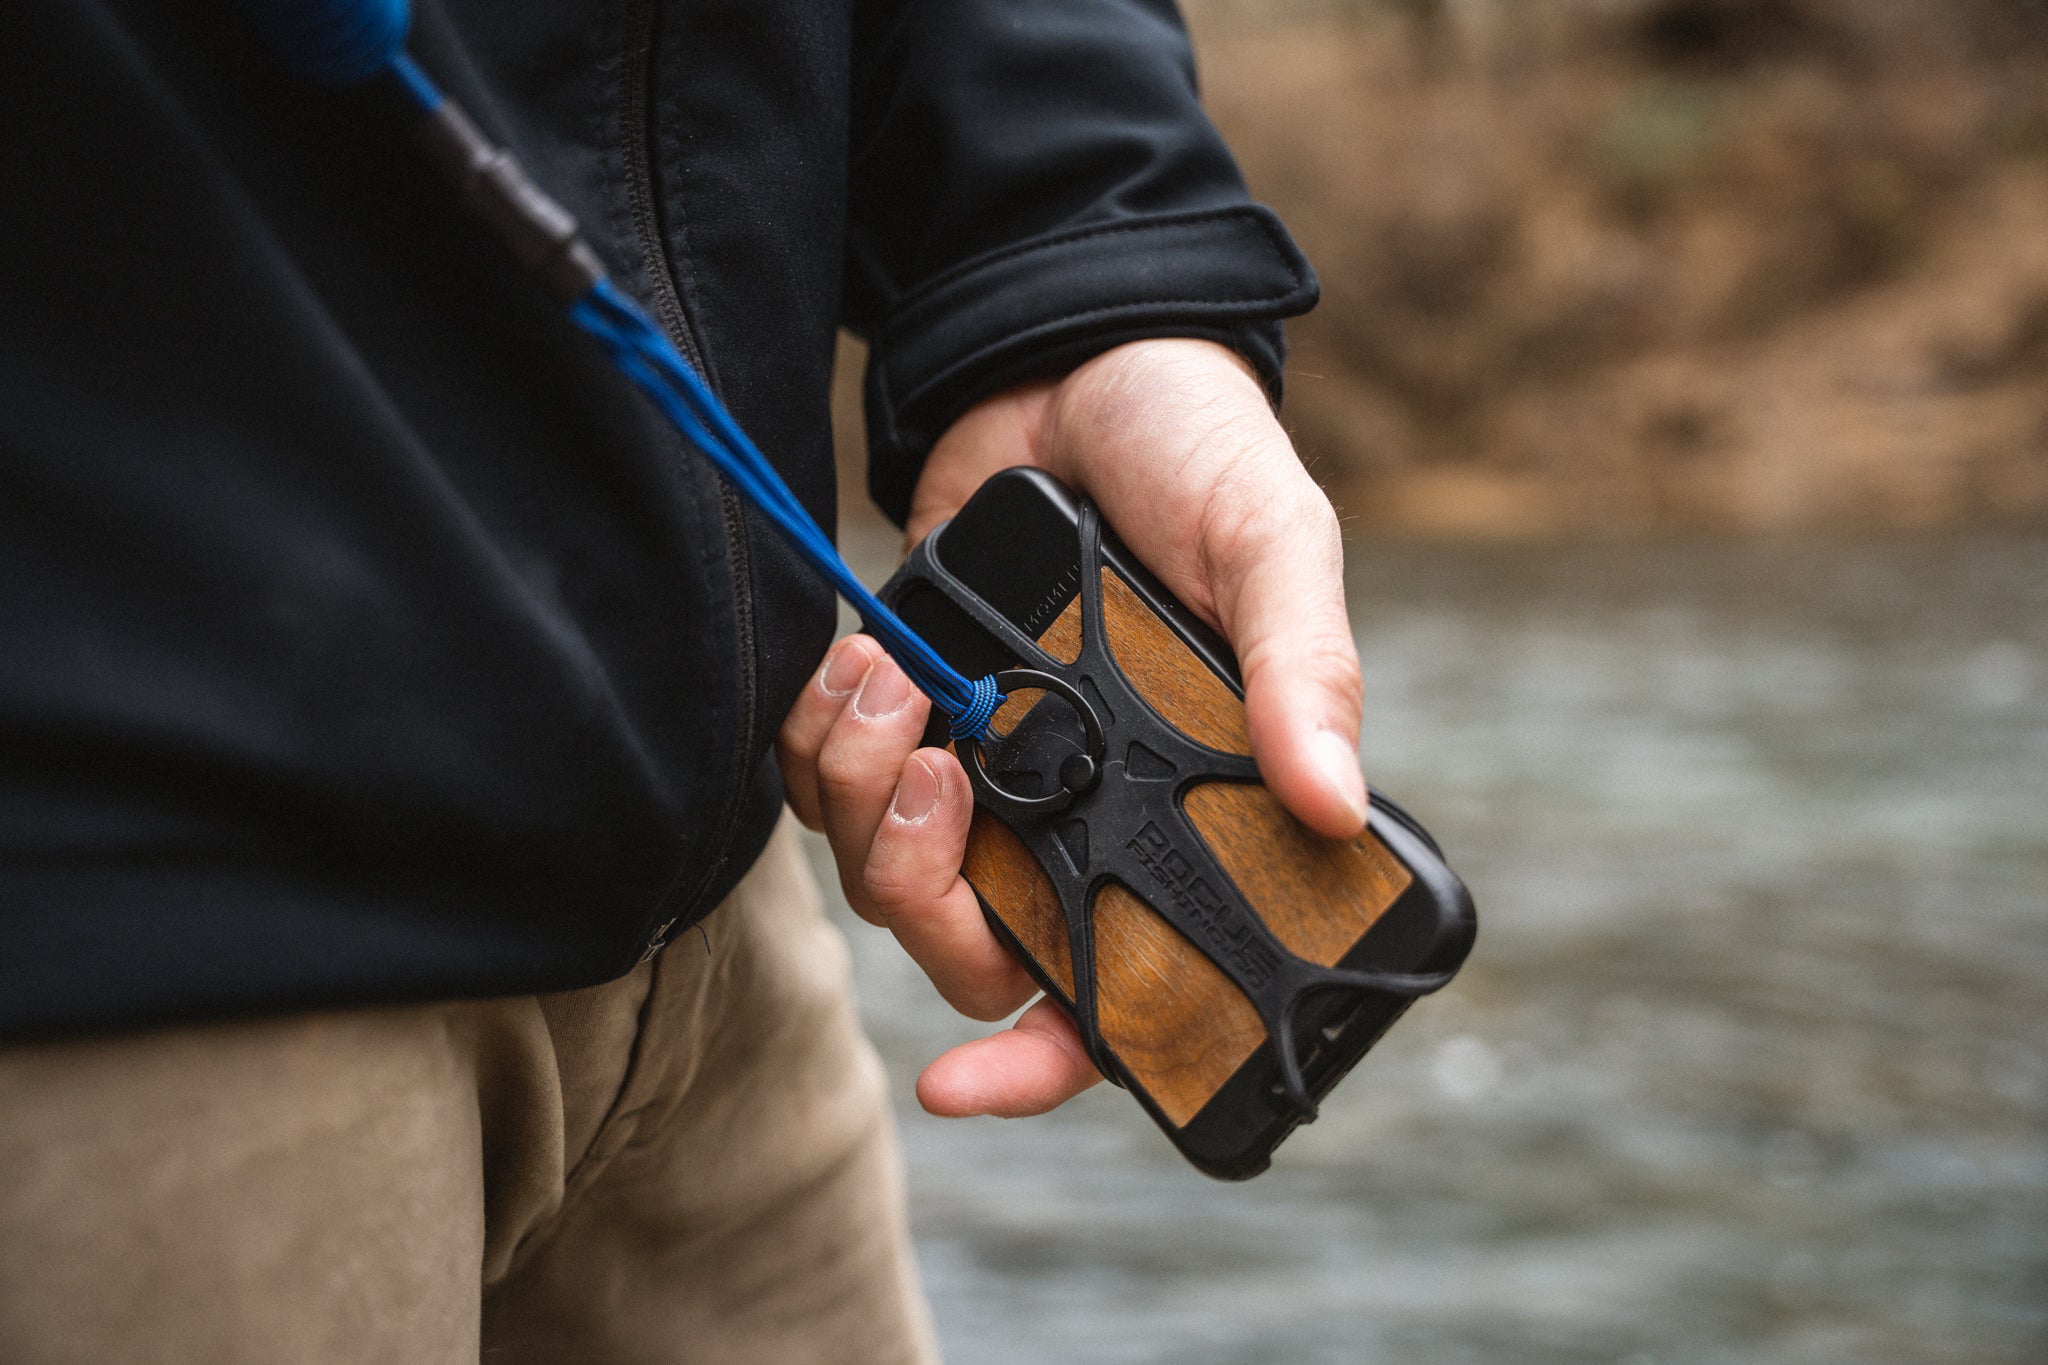  Rogue Fishing Co. The Protector Phone Tether, Use As Cell Phone  Lanyard or Hiking/Boating/Kayak Tether